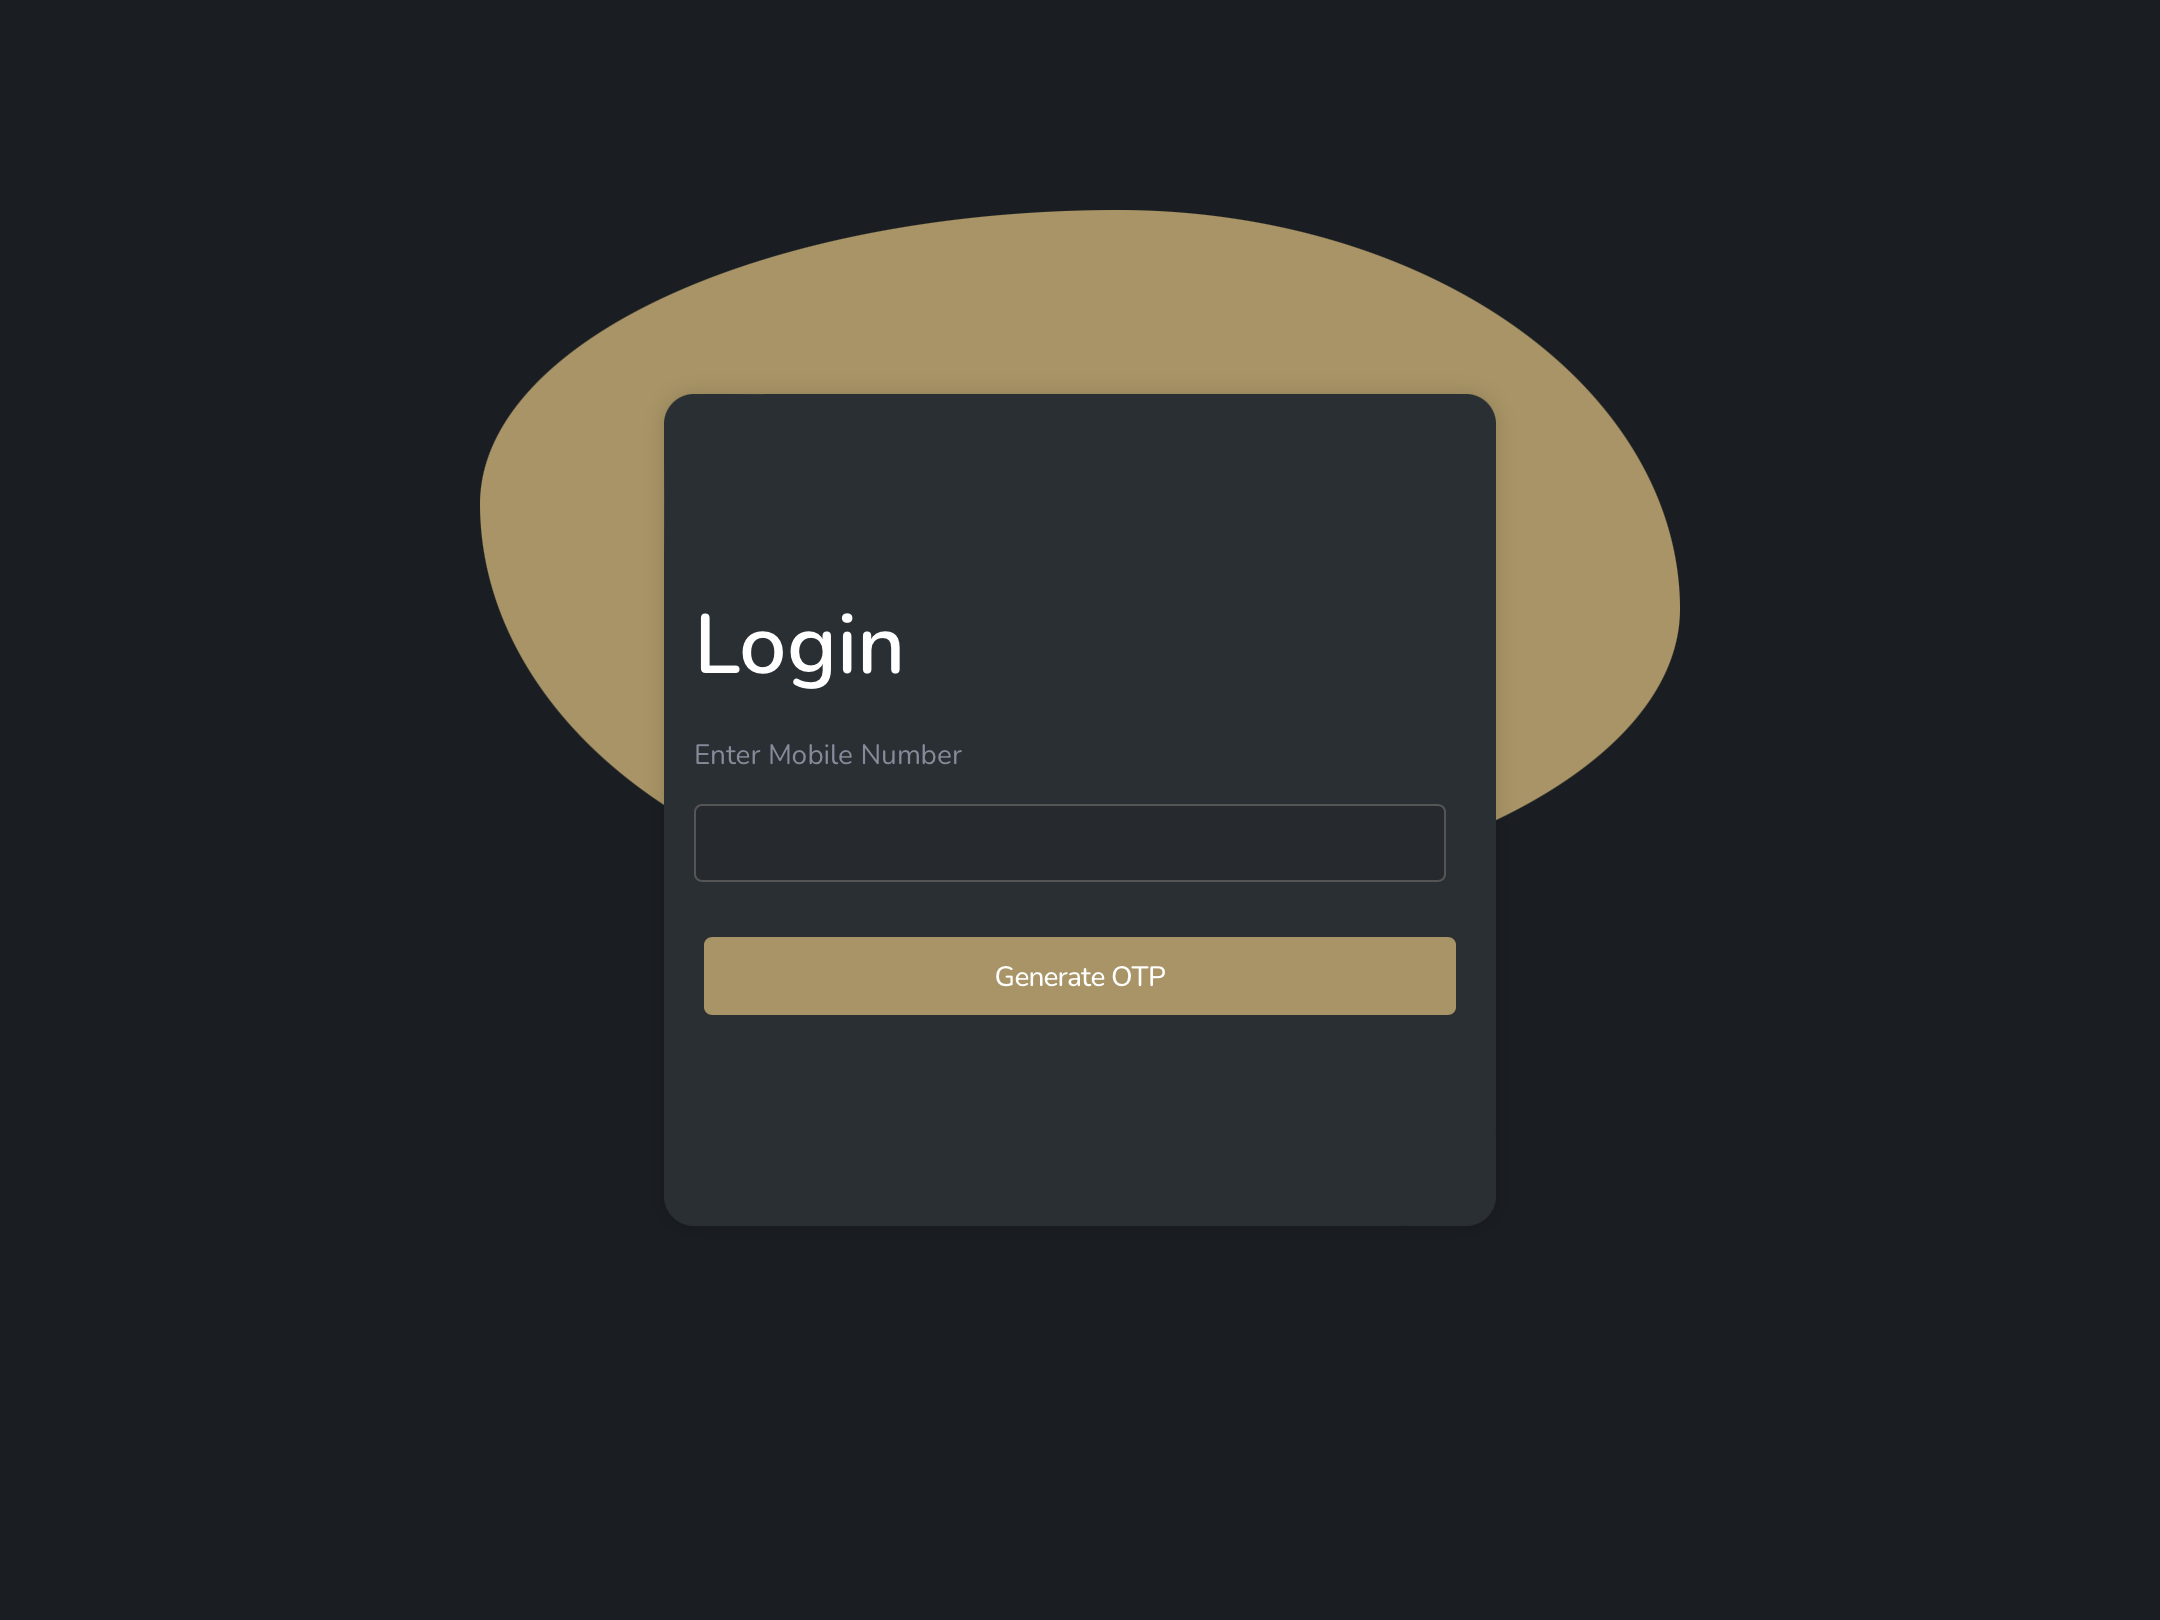 Tanyo CRM webiste login interface with a text field for entering a mobile number and a button that says 'Generate OTP'. The interface has a dark background with a beige oval shape behind it.